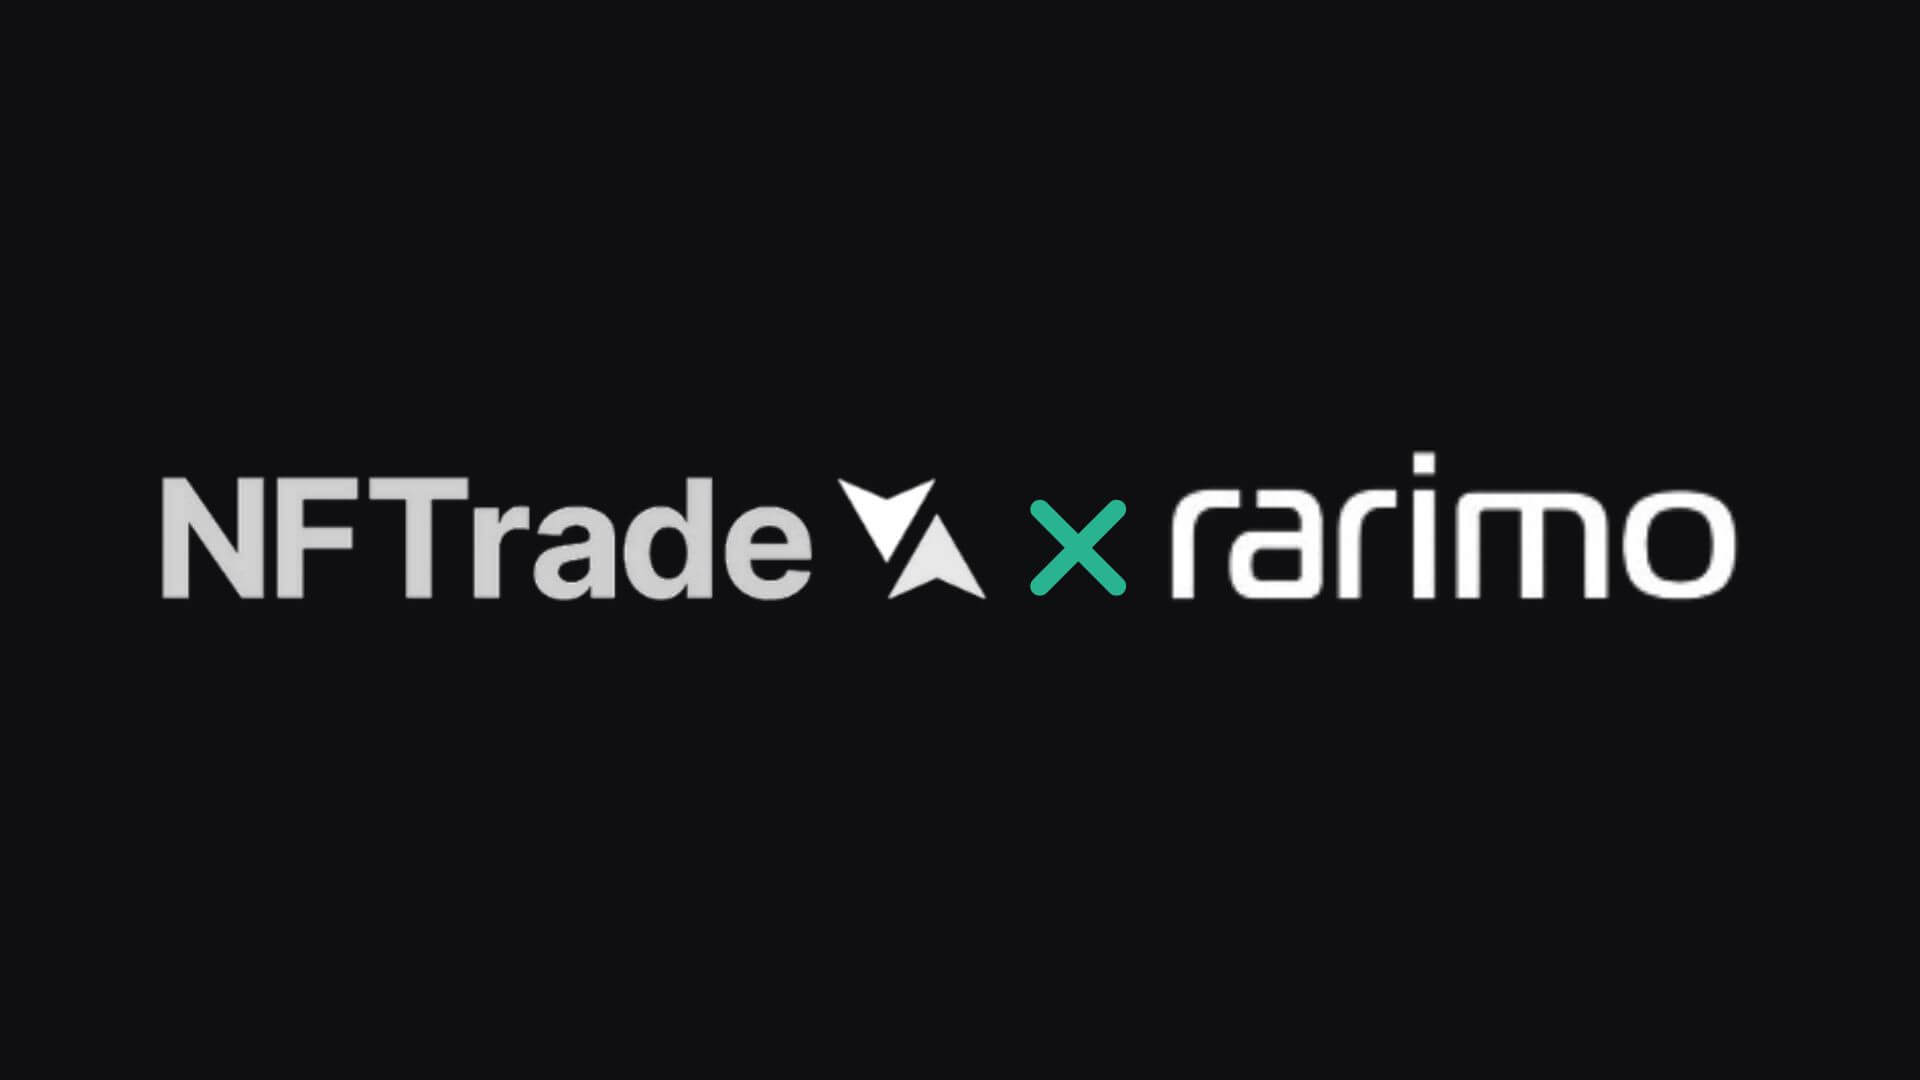 NFTrade and Rarimo partner to enable cross-chain NFT purchase with any cryptocurrency